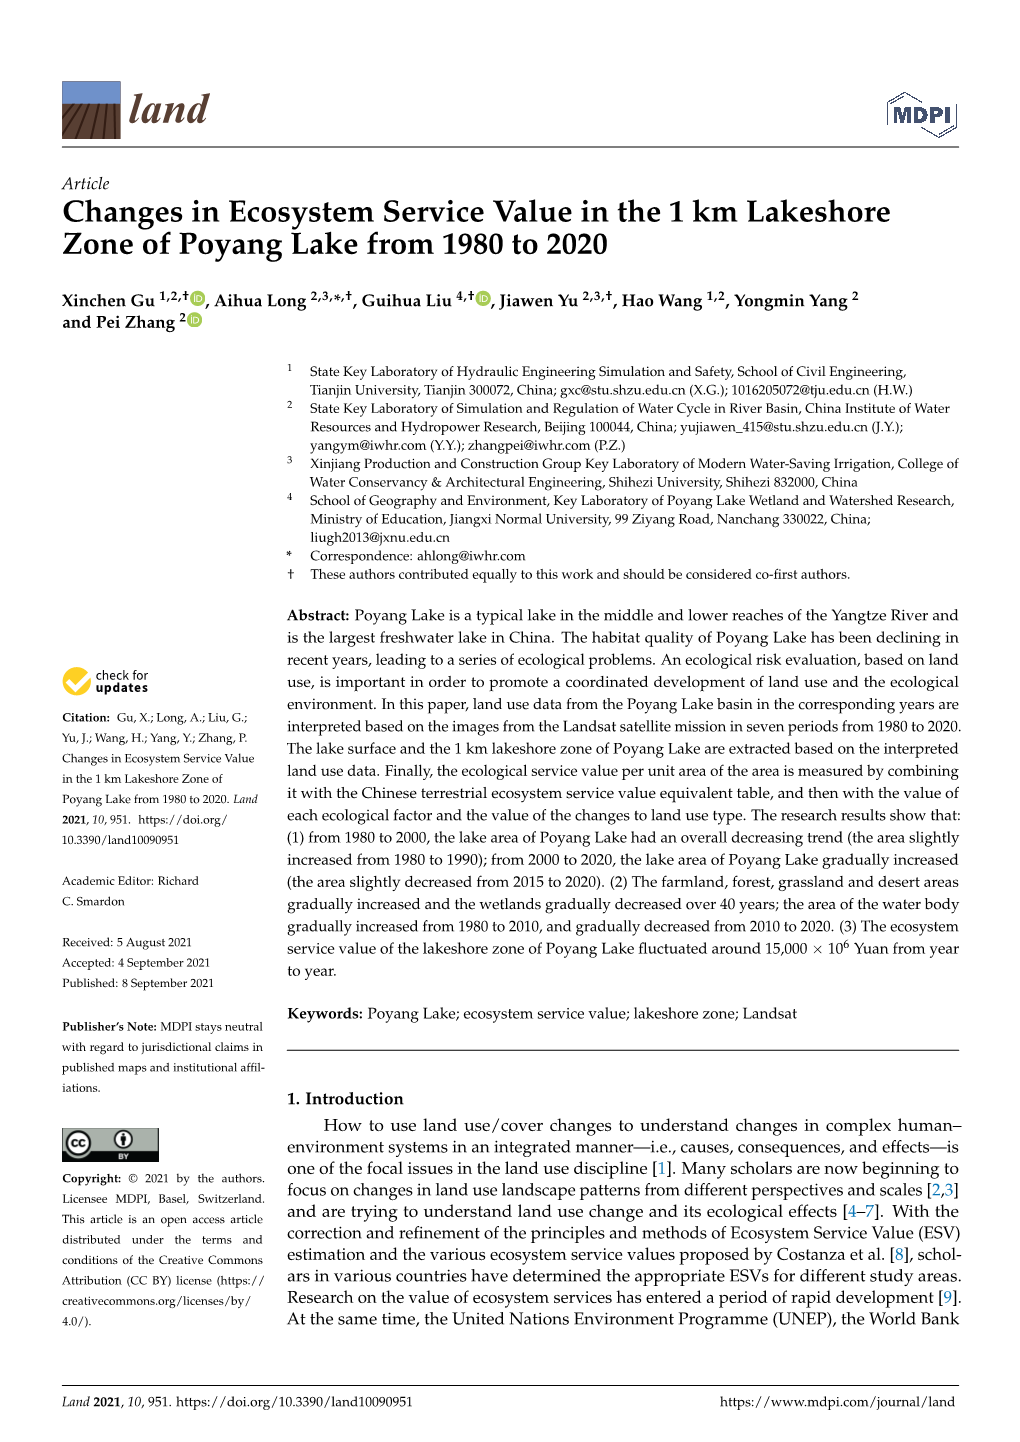 Changes in Ecosystem Service Value in the 1 Km Lakeshore Zone of Poyang Lake from 1980 to 2020